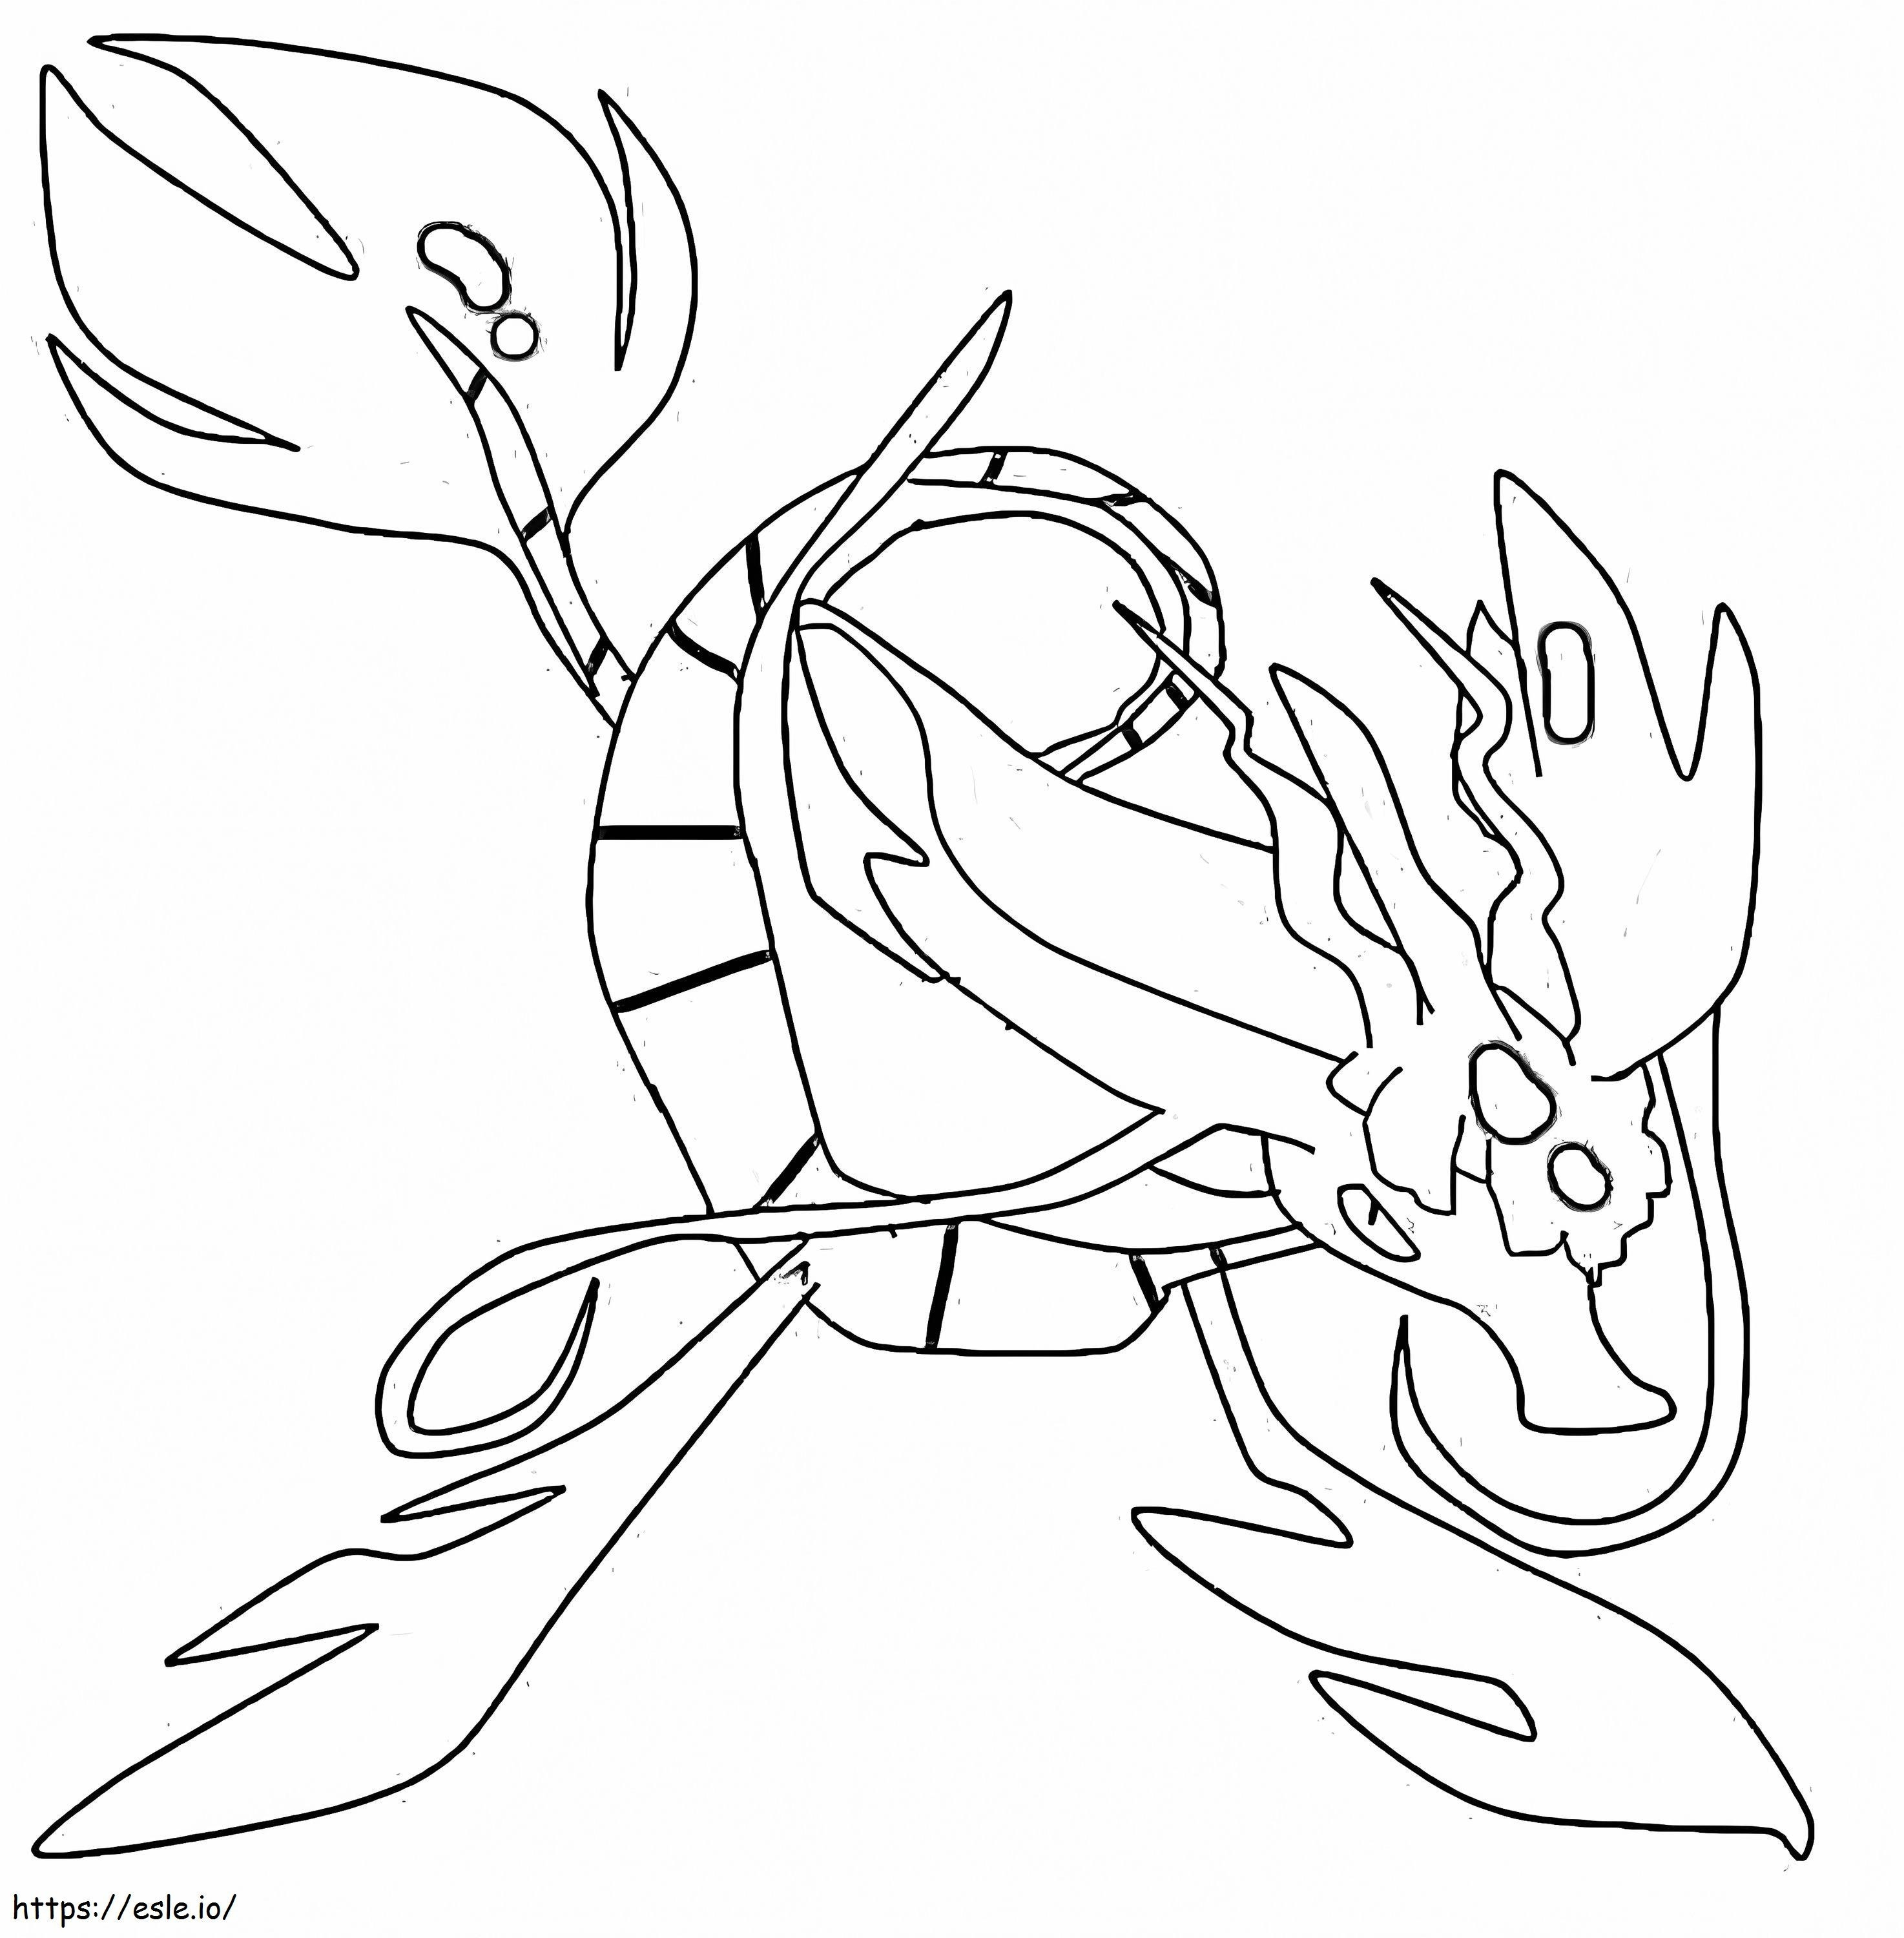 Draggale Pokemon 2 coloring page